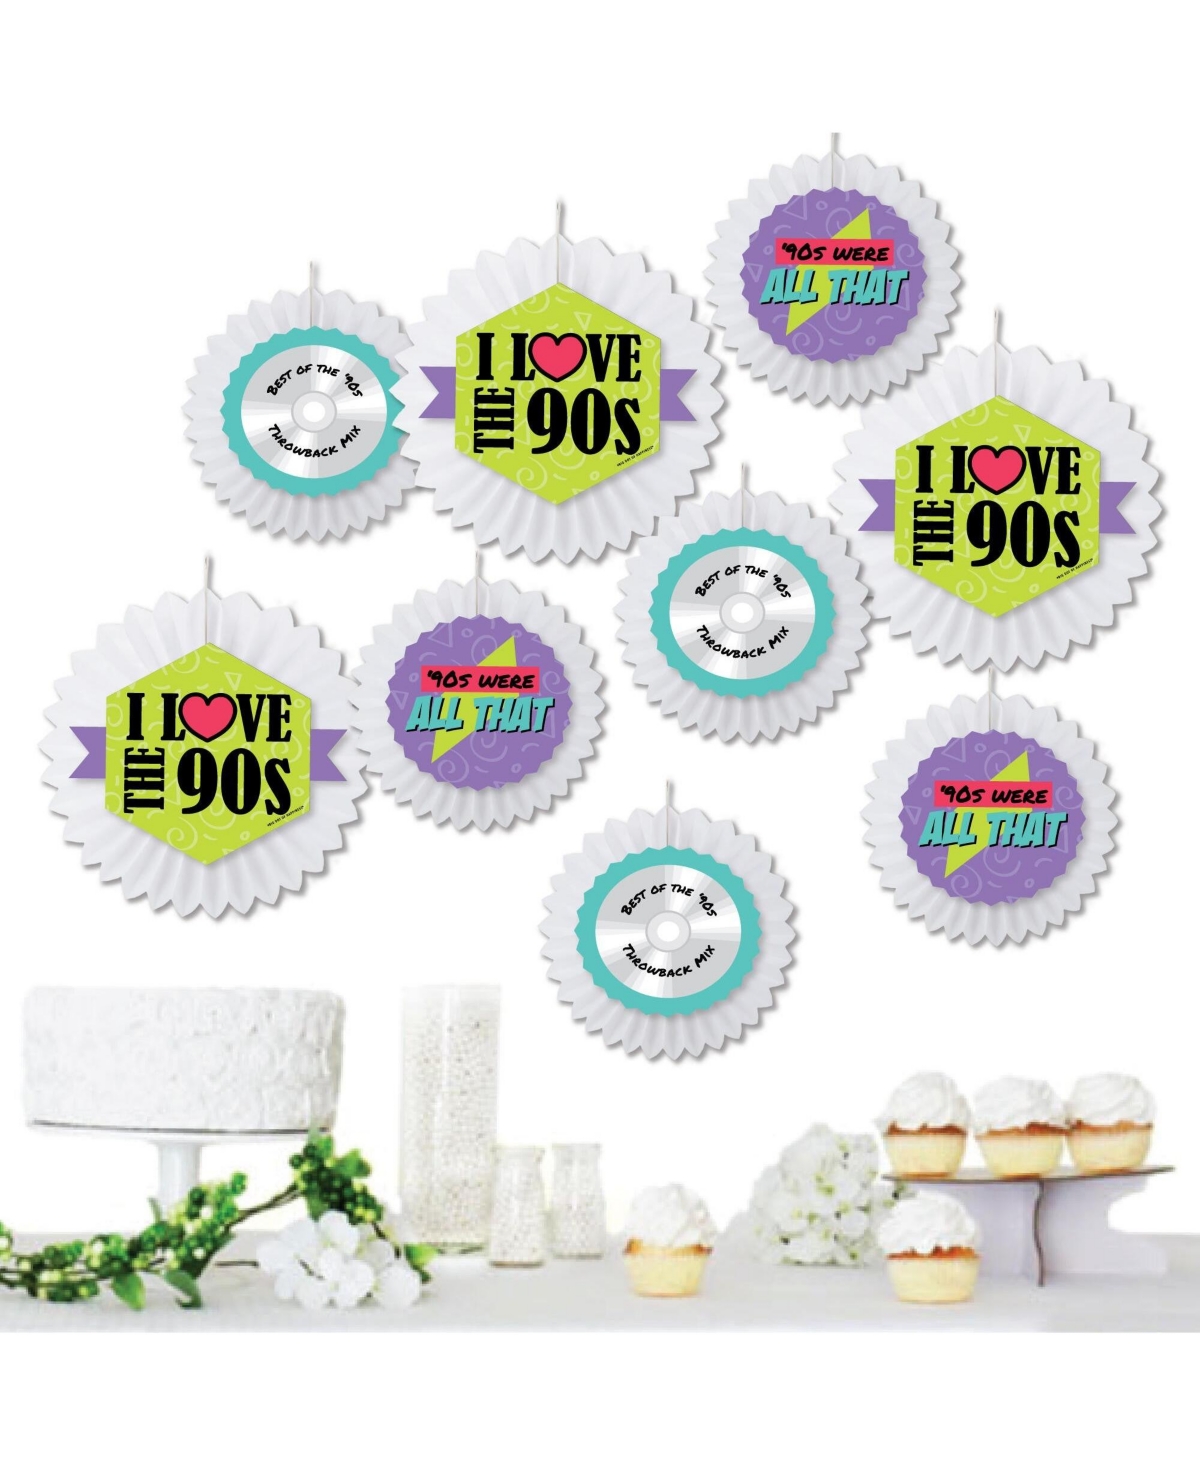 90s Throwback - Hanging 1990s Party Tissue Decoration Kit Paper Fans - Set of 9